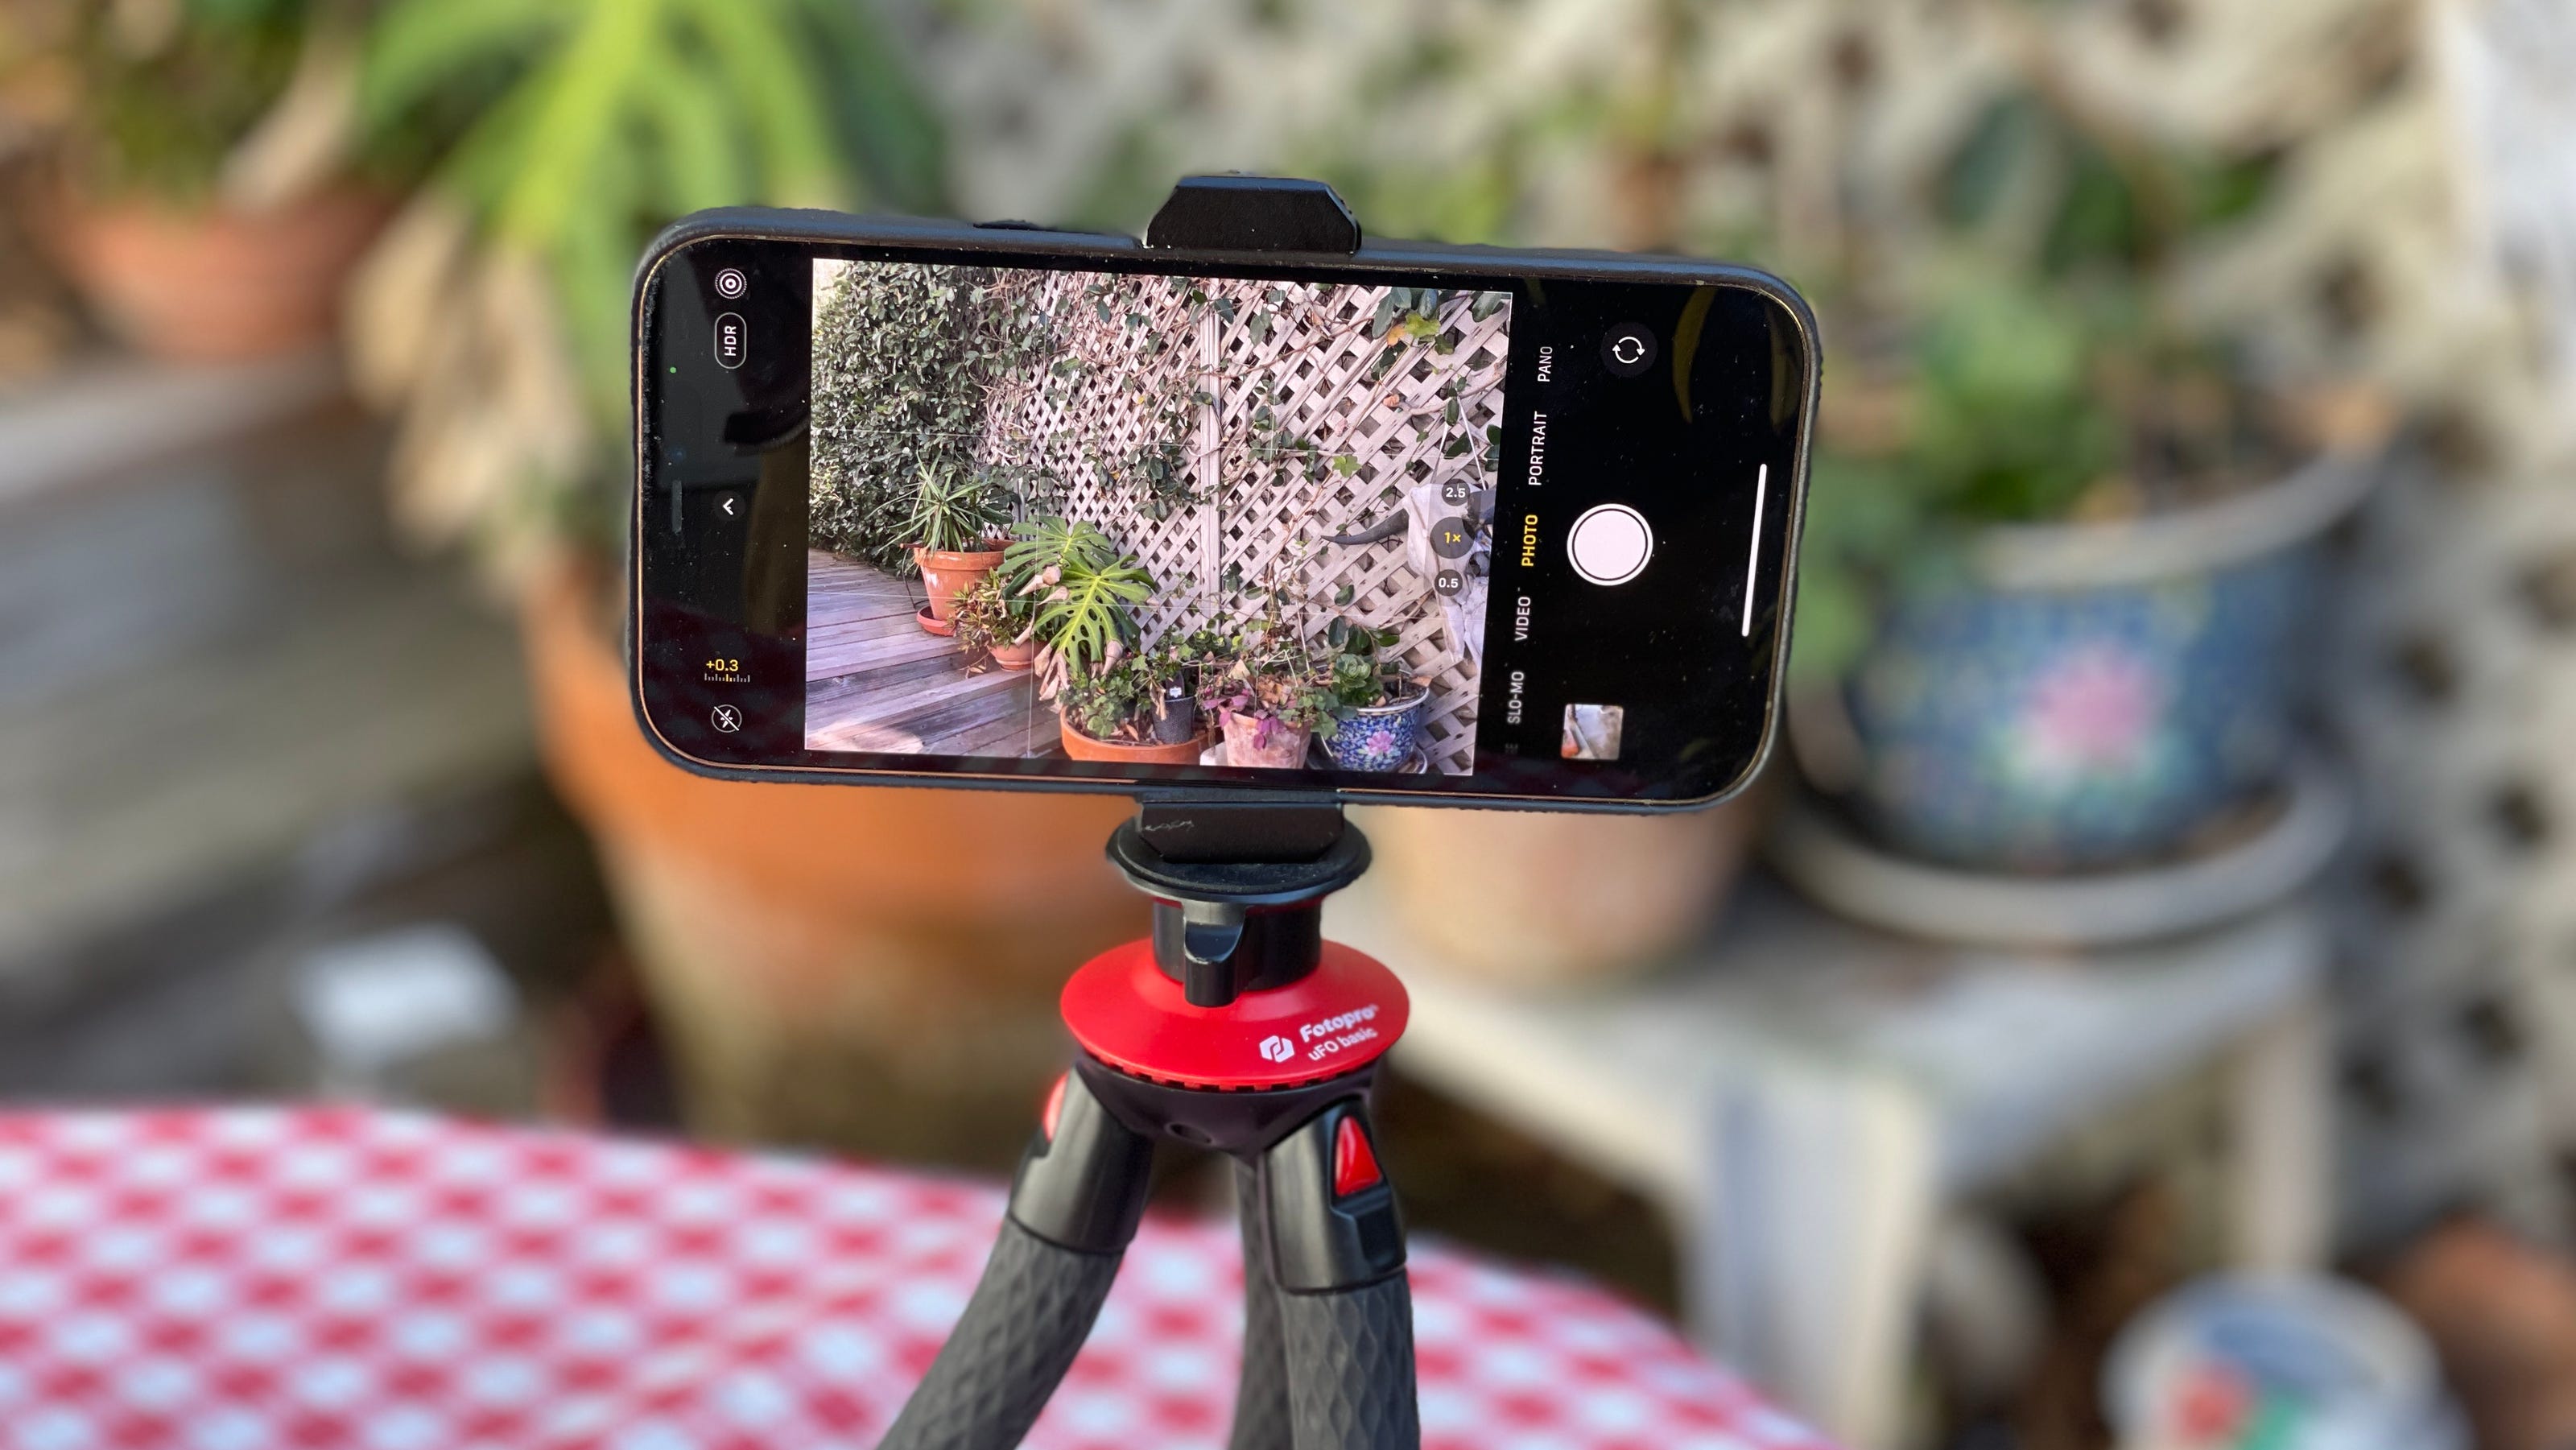 Review: Apple iPhone 12 Pro Max camera great, differences hard to see